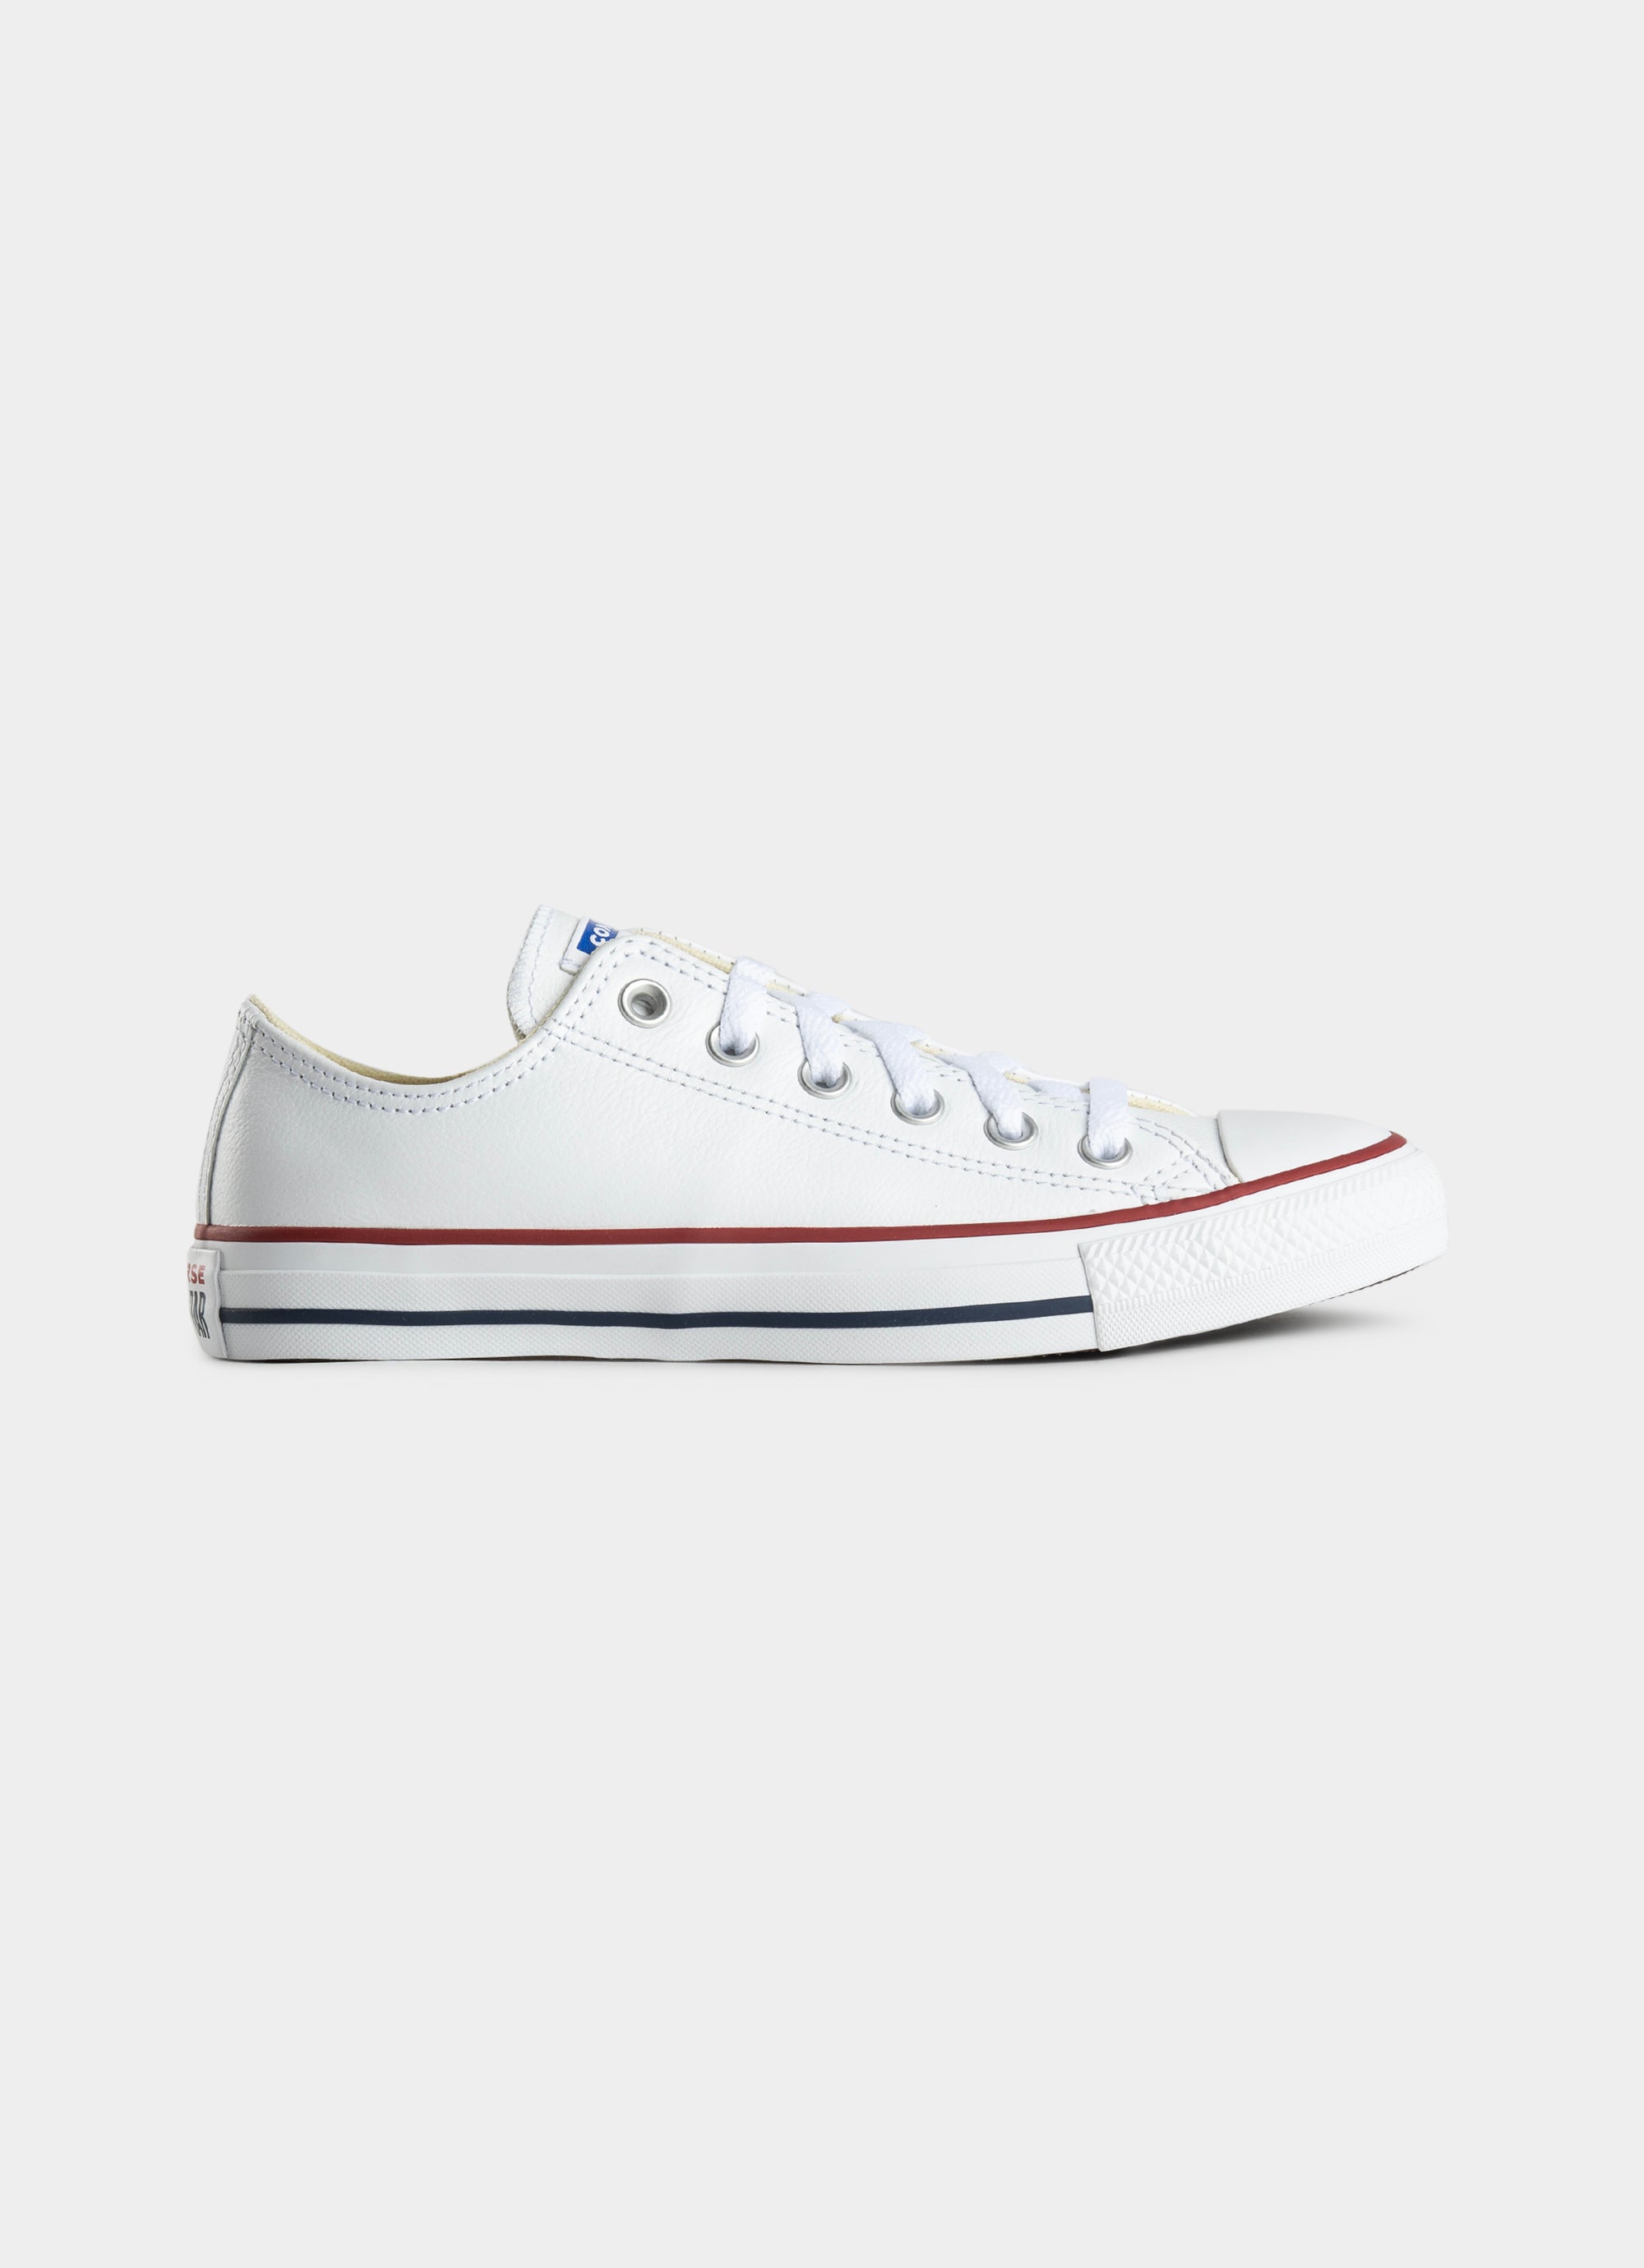 Converse Chuck Taylor Star Low 'leather' Shoe in |